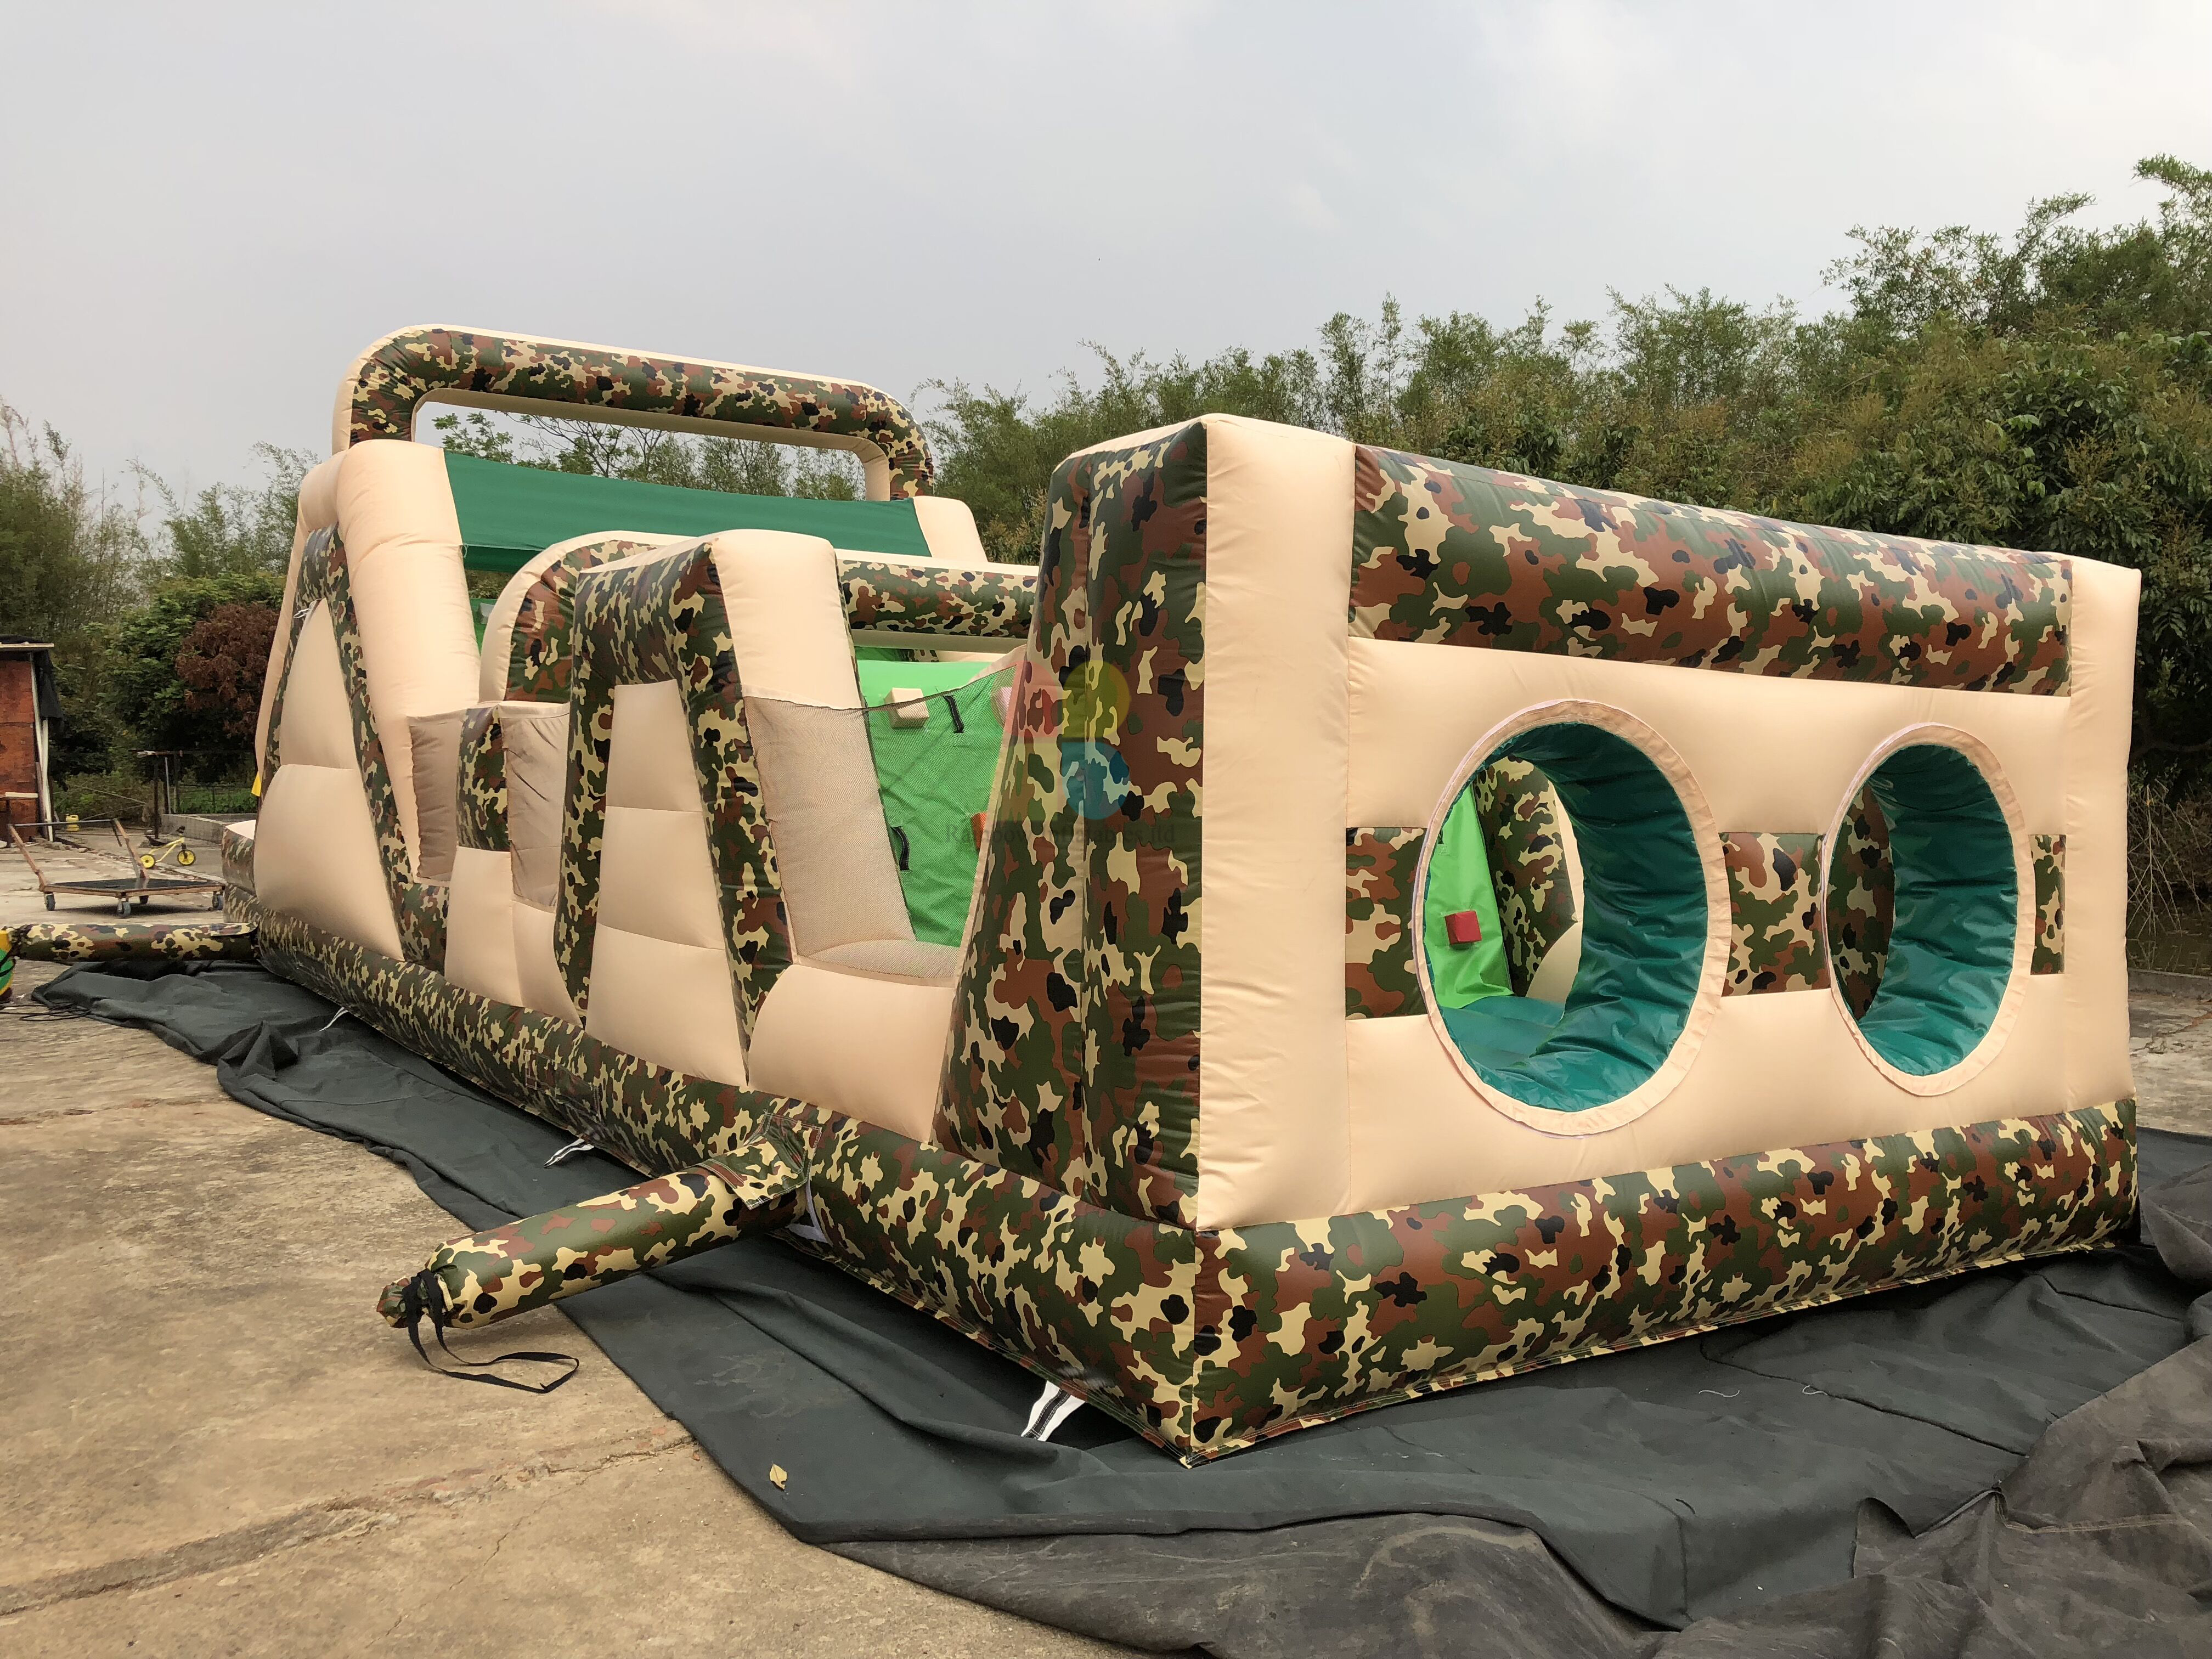 New Design Outdoor Inflatable Camouflage Theme Obstacle Course for Kids And Adults